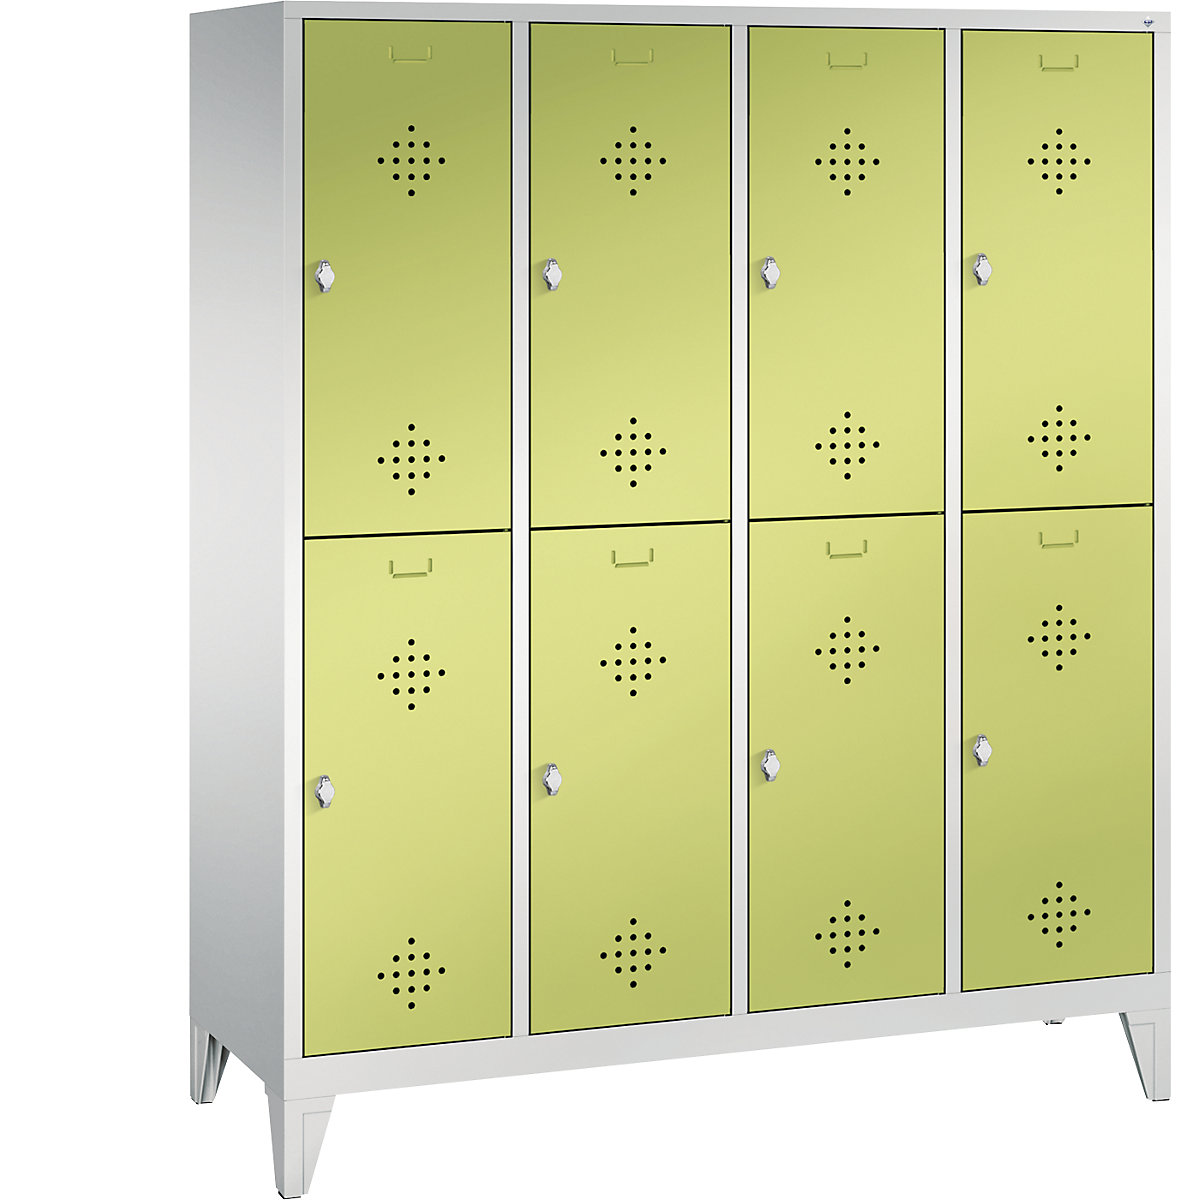 CLASSIC cloakroom locker with feet, double tier – C+P, 4 compartments, 2 shelf compartments each, compartment width 400 mm, light grey / viridian green-5